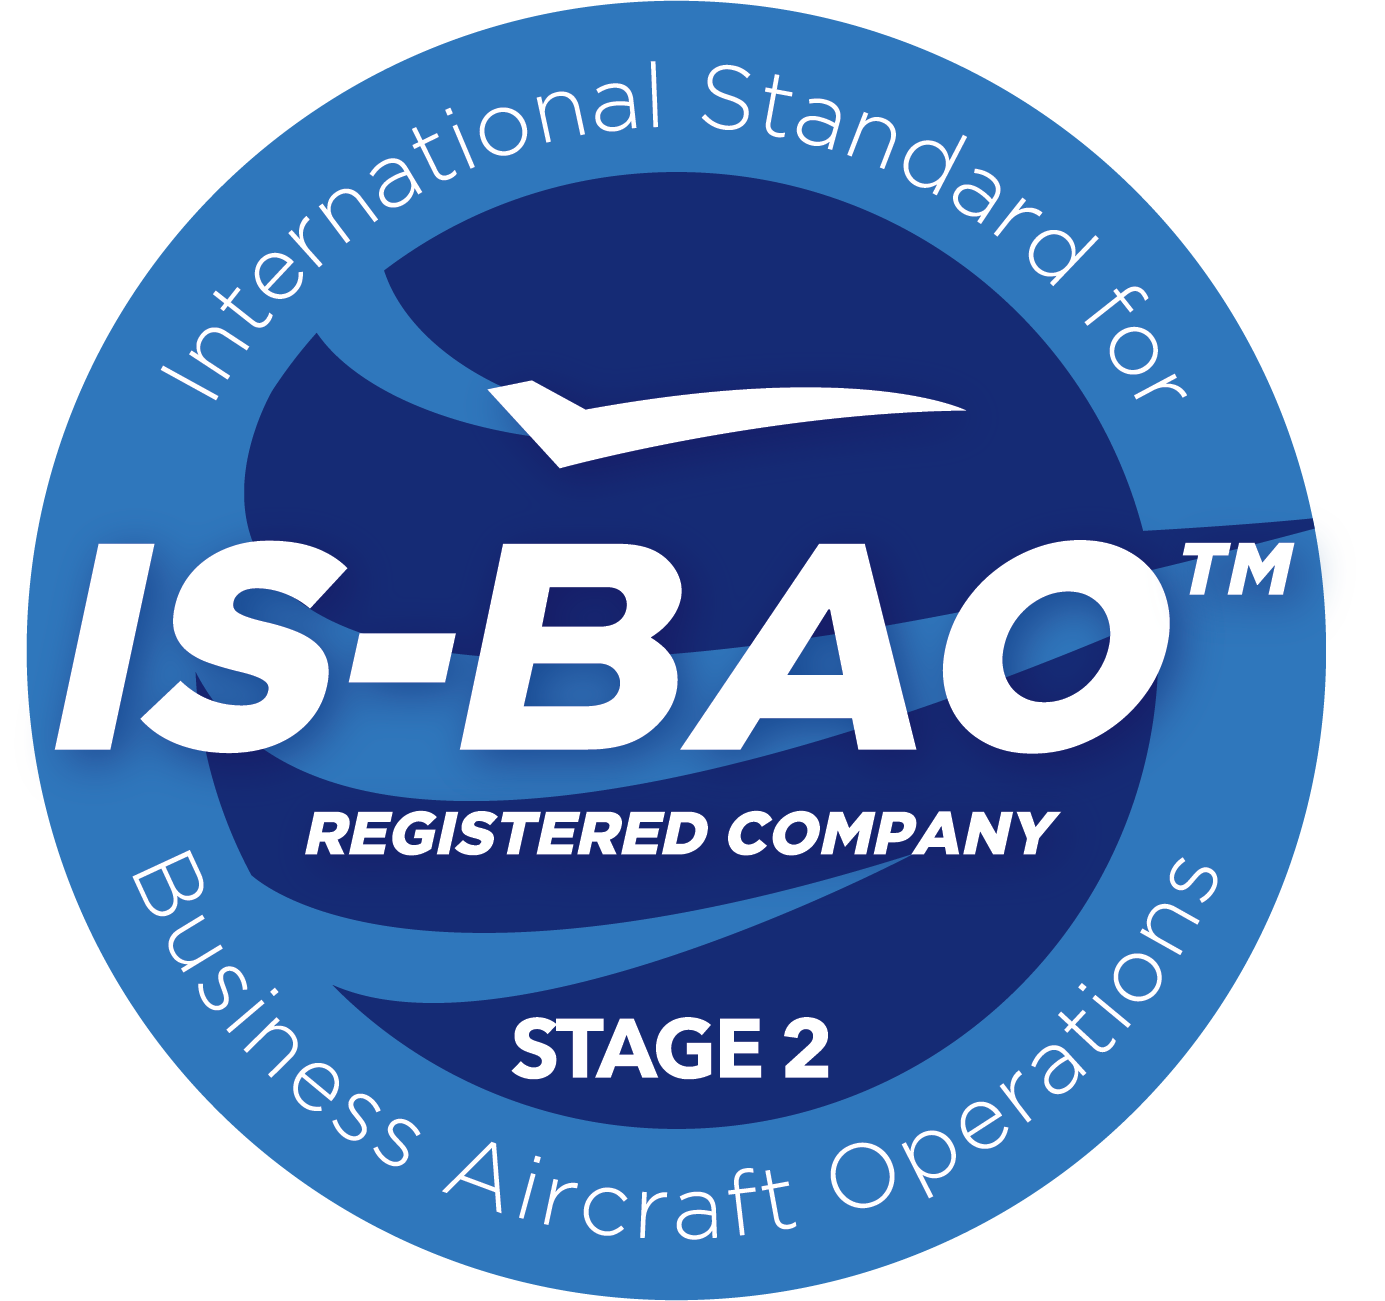 IS-BAO-registered-company stage2 (1)